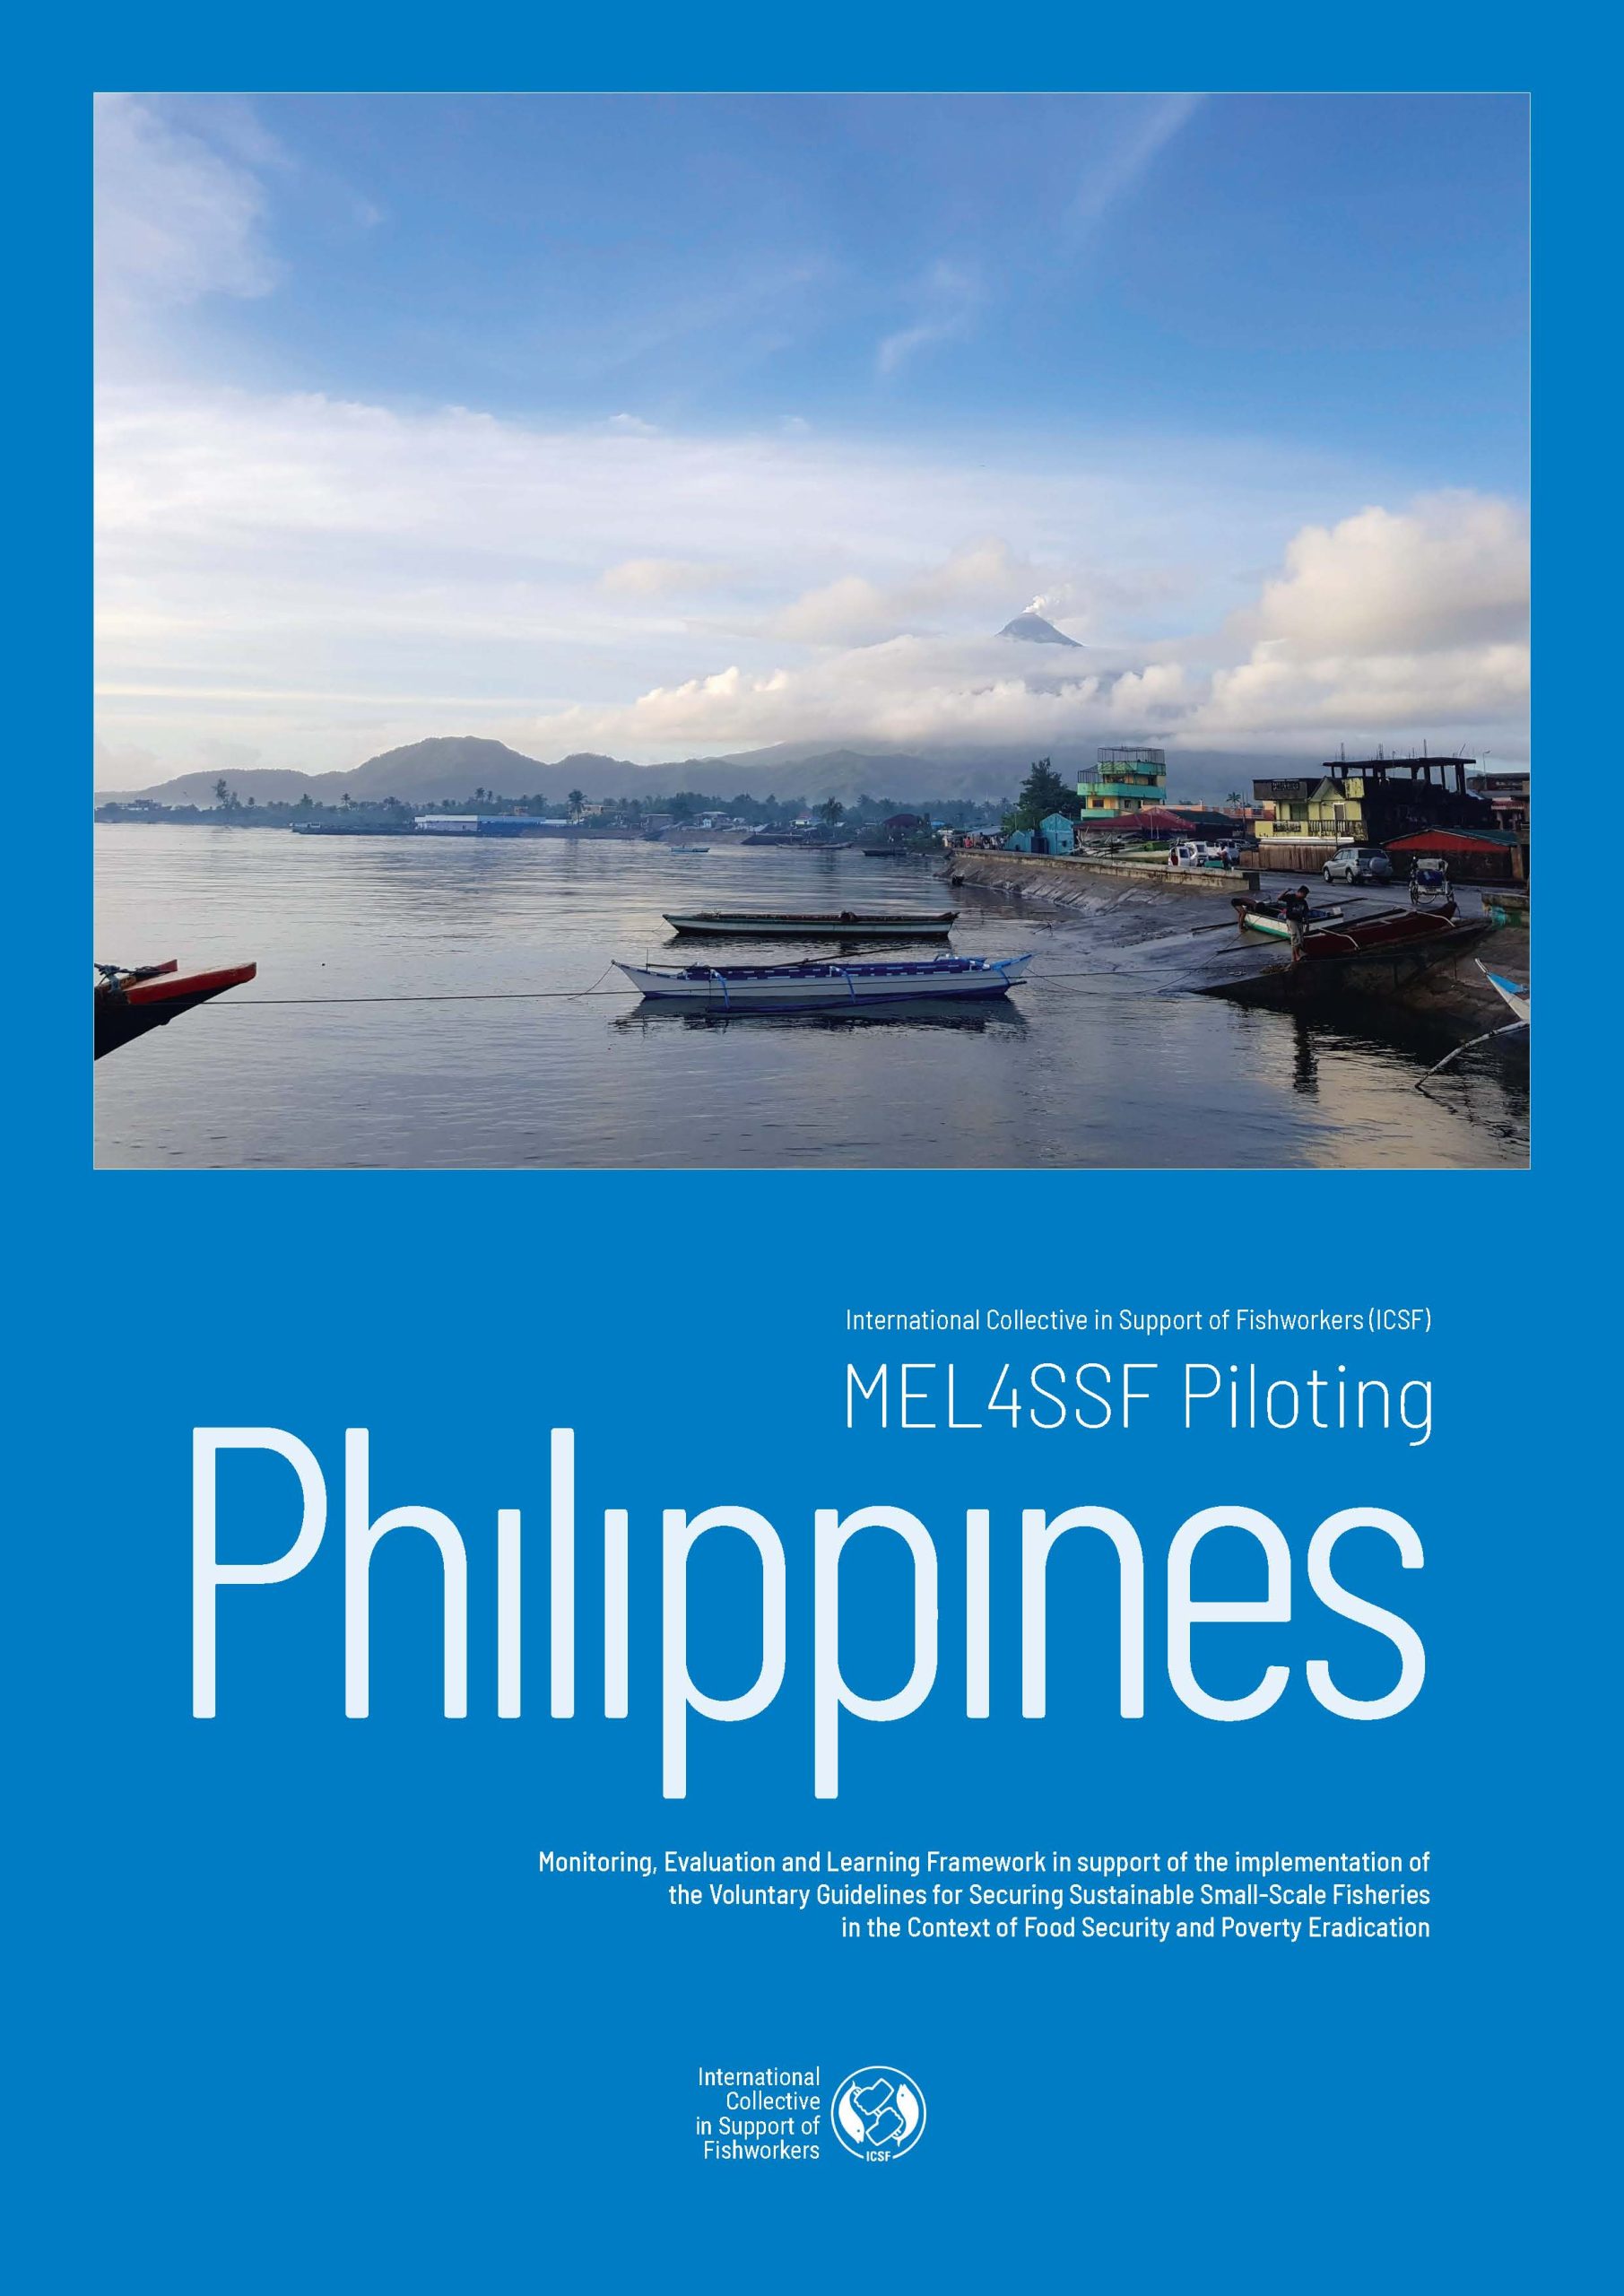 MEL4SSF Piloting Philippines: Monitoring, Evaluation and Learning Framework in support of the implementation of the Voluntary Guidelines for Securing Sustainable Small-Scale Fisheries in the Context of Food Security and Poverty Eradication by Ronald B. Rodriguez and ICSF